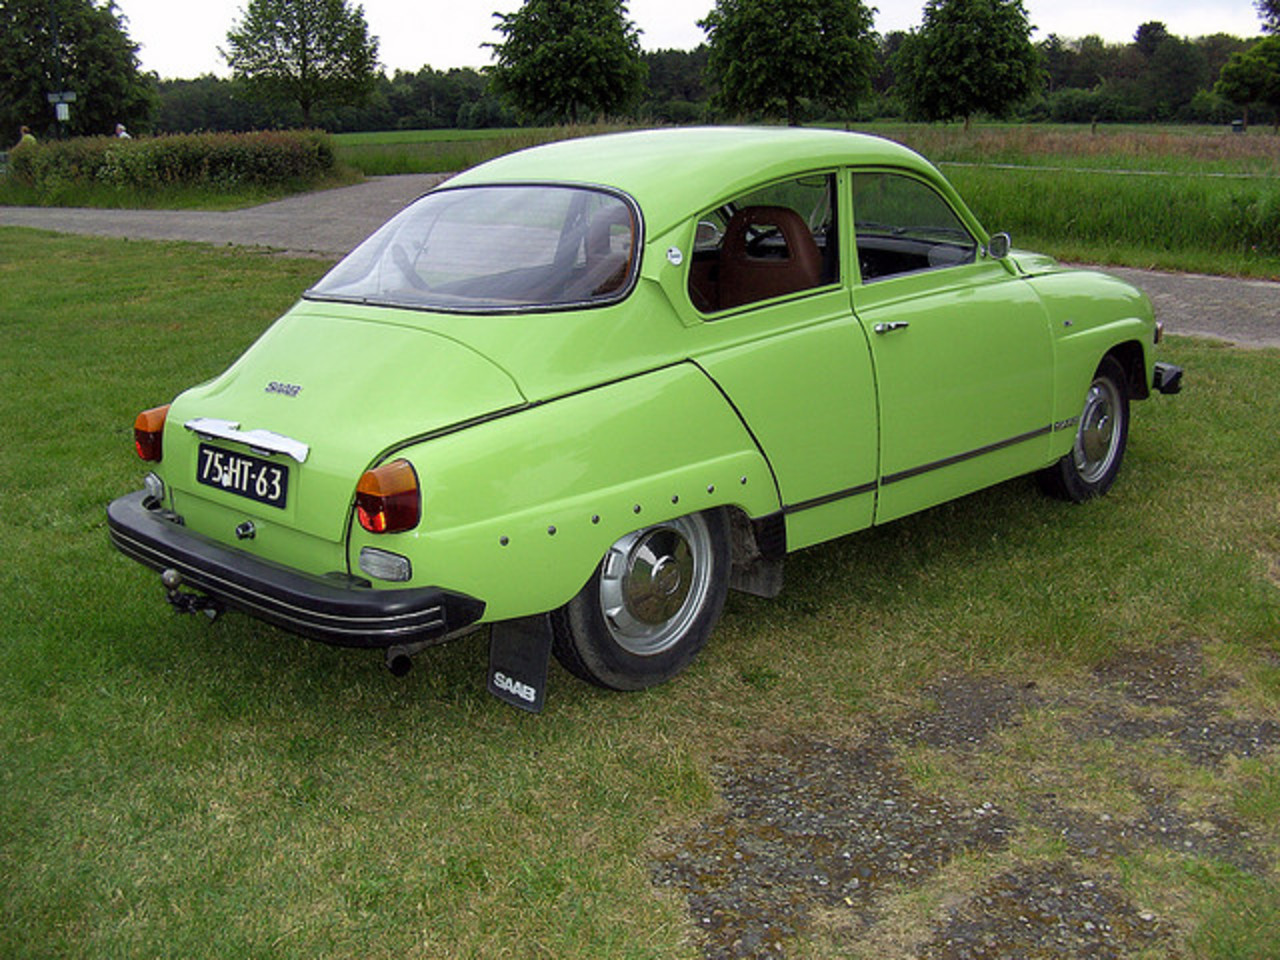 Saab 96 L: Photo gallery, complete information about model ...